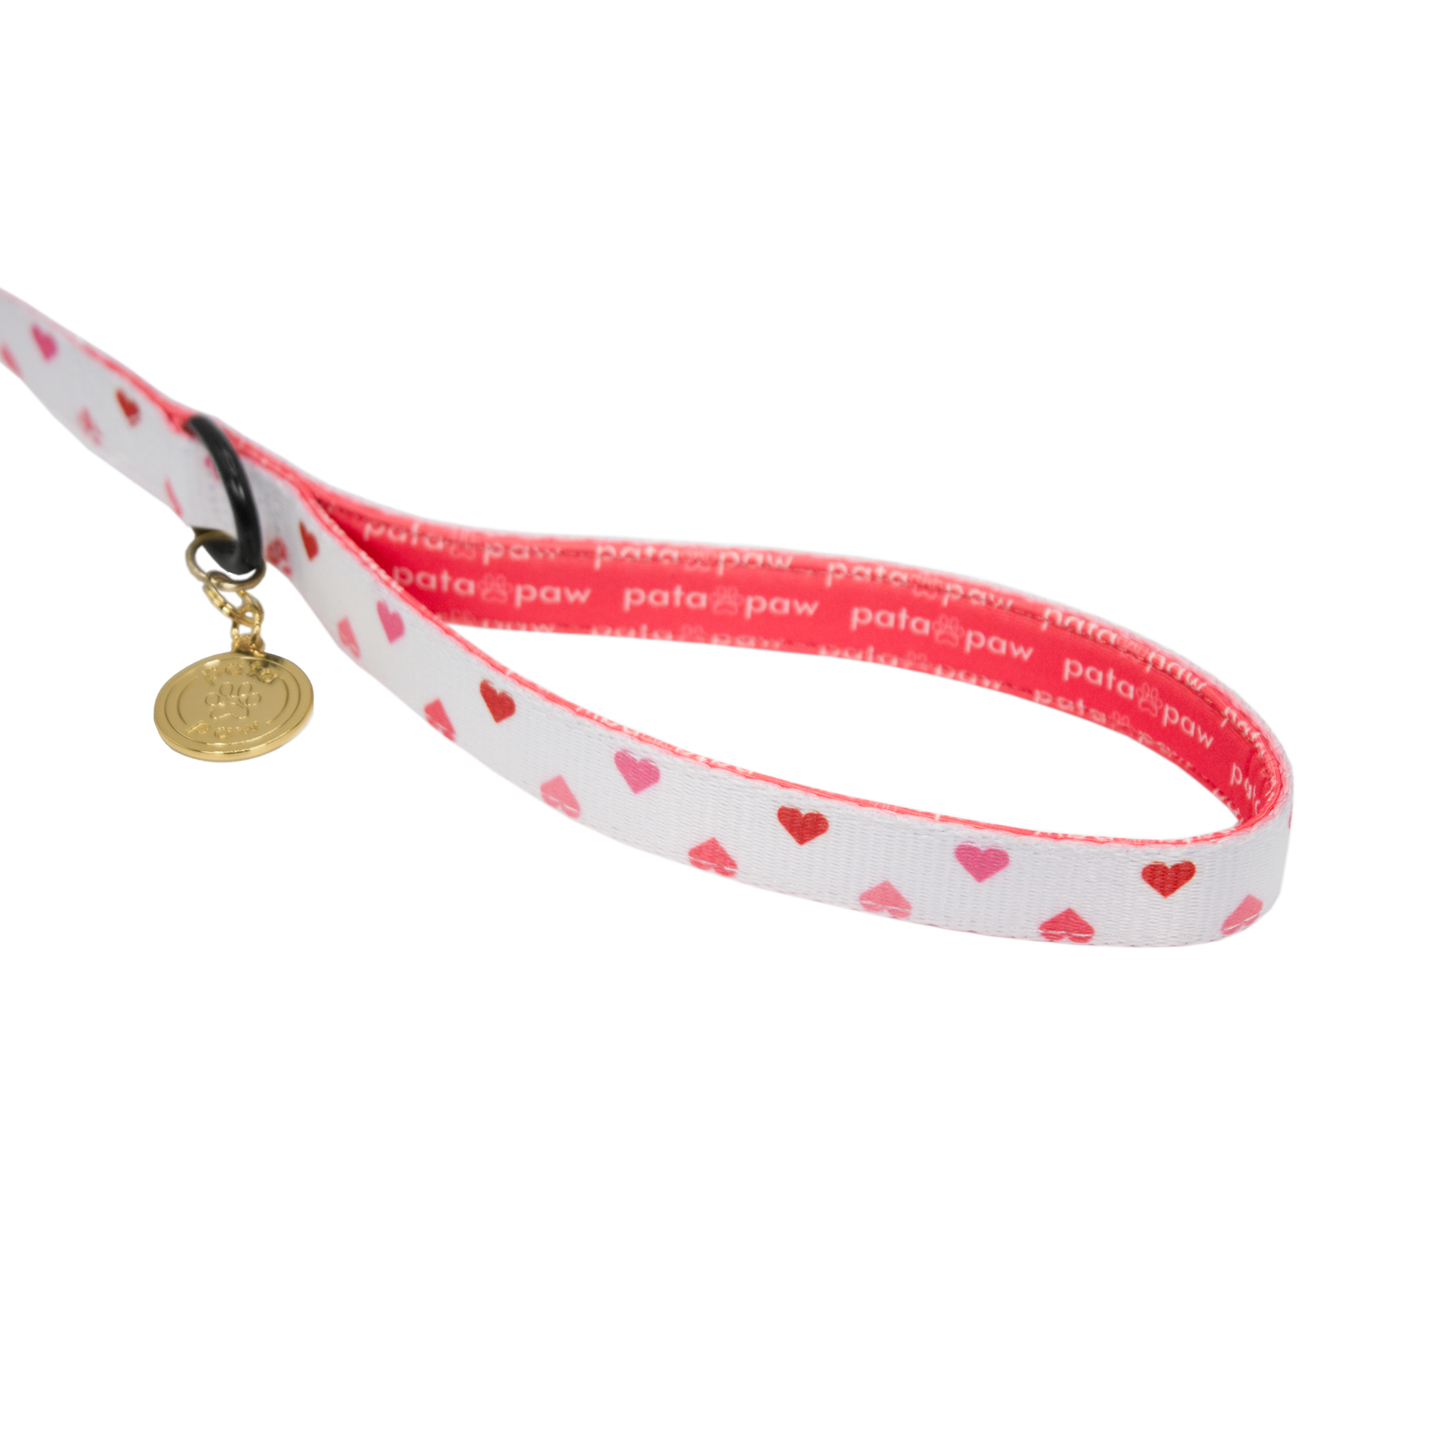 pata paw blush hearts leash showing signature handle, metallic ring to attach a poop bag holder and golden paw medal